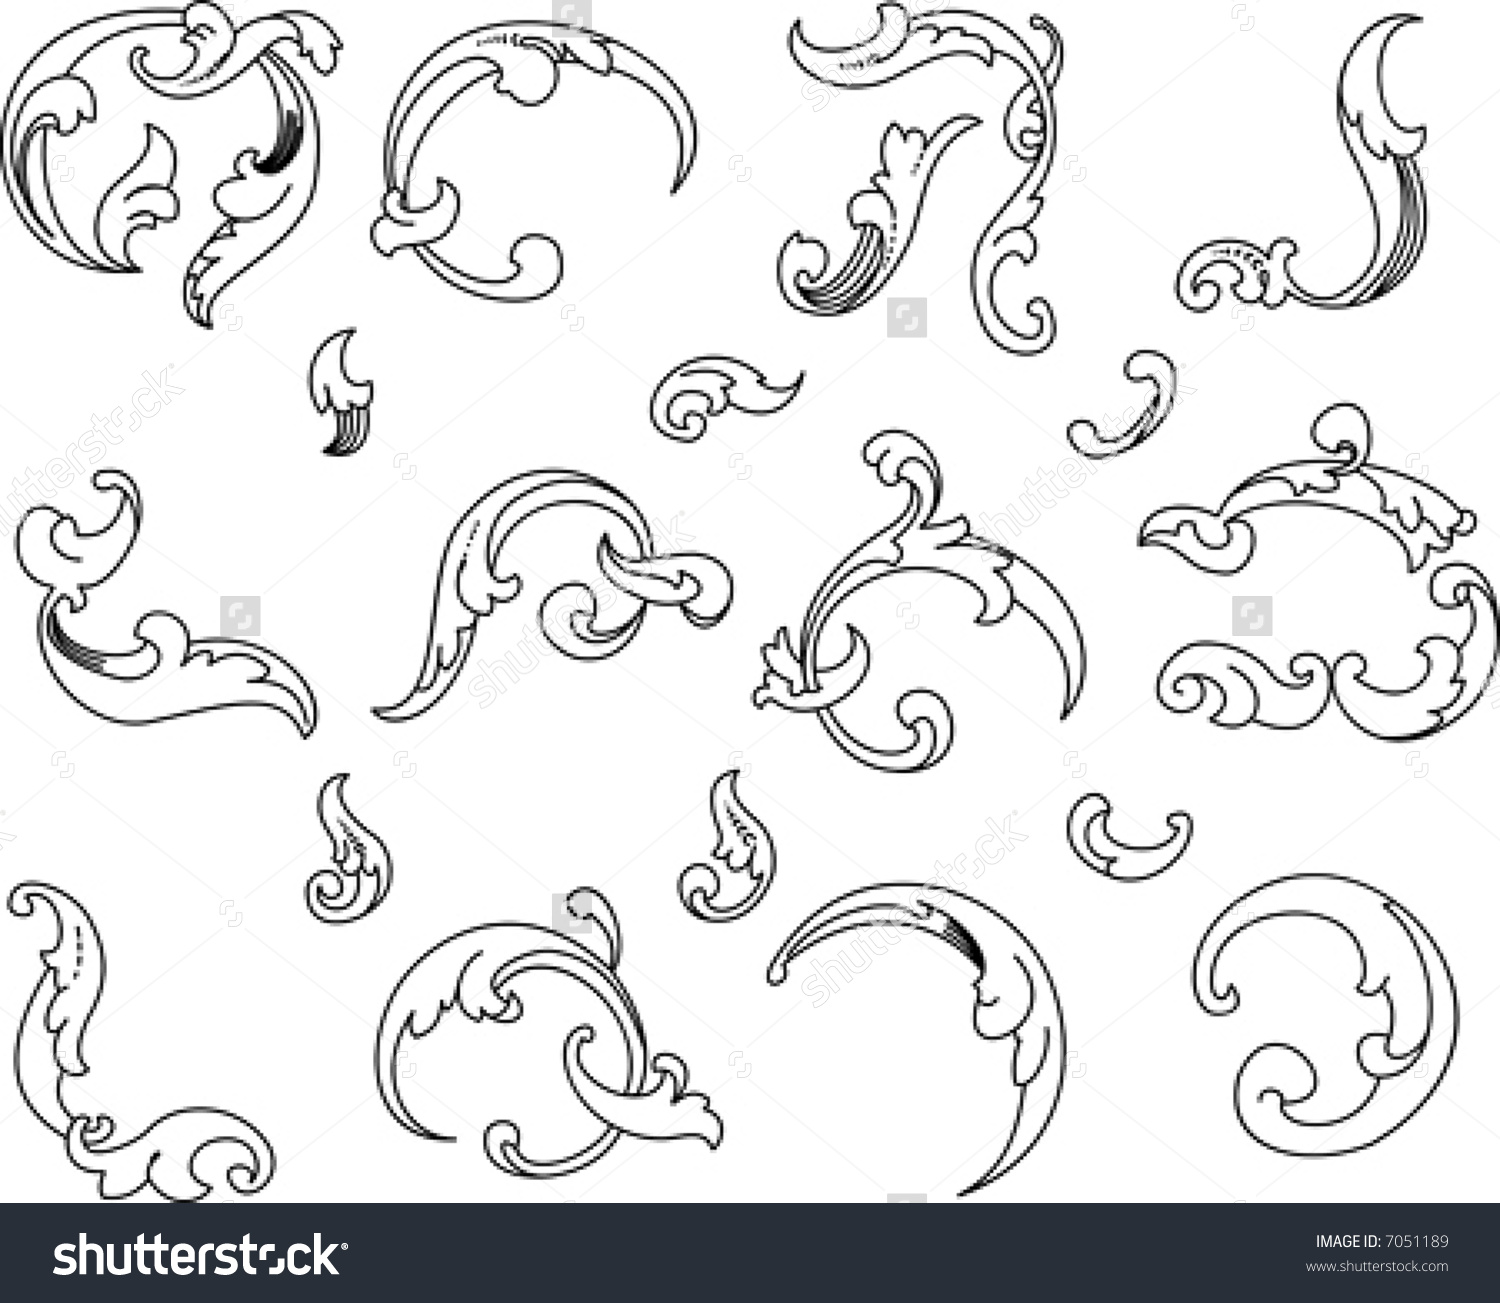 Baroque Clipart. All Curves Separately. Stock Vector Illustration.